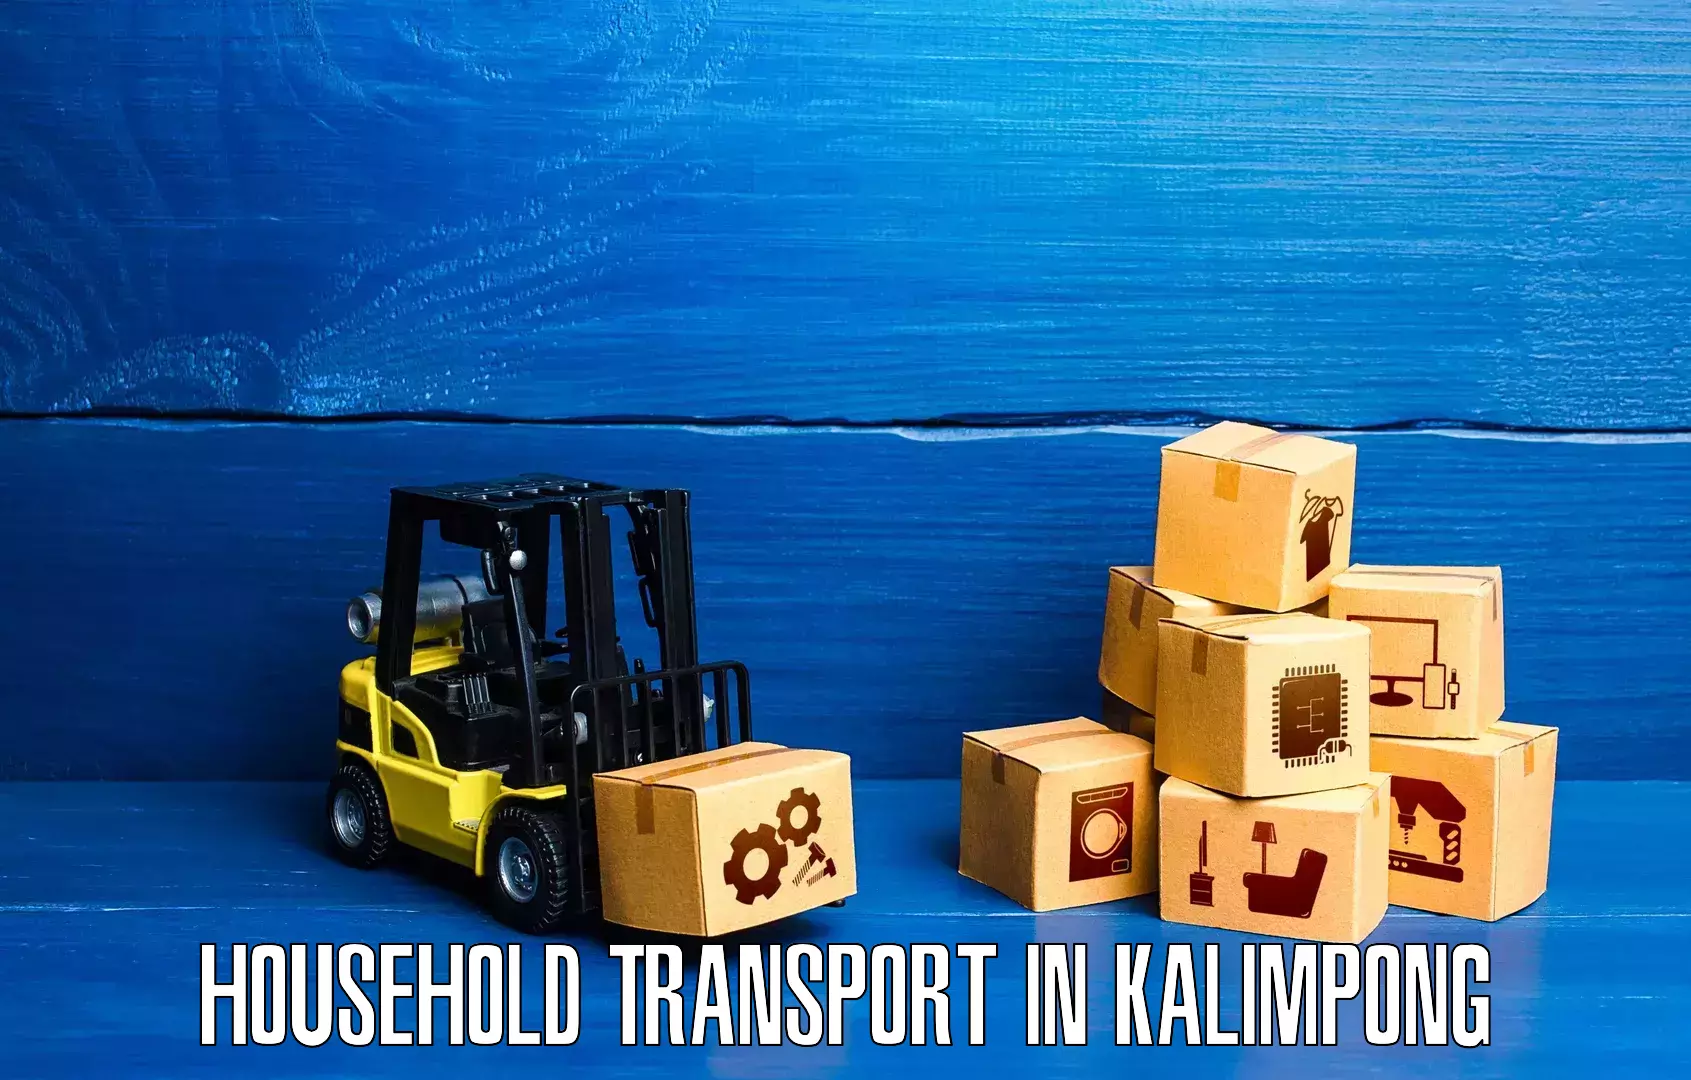 Household goods transport service in Kalimpong